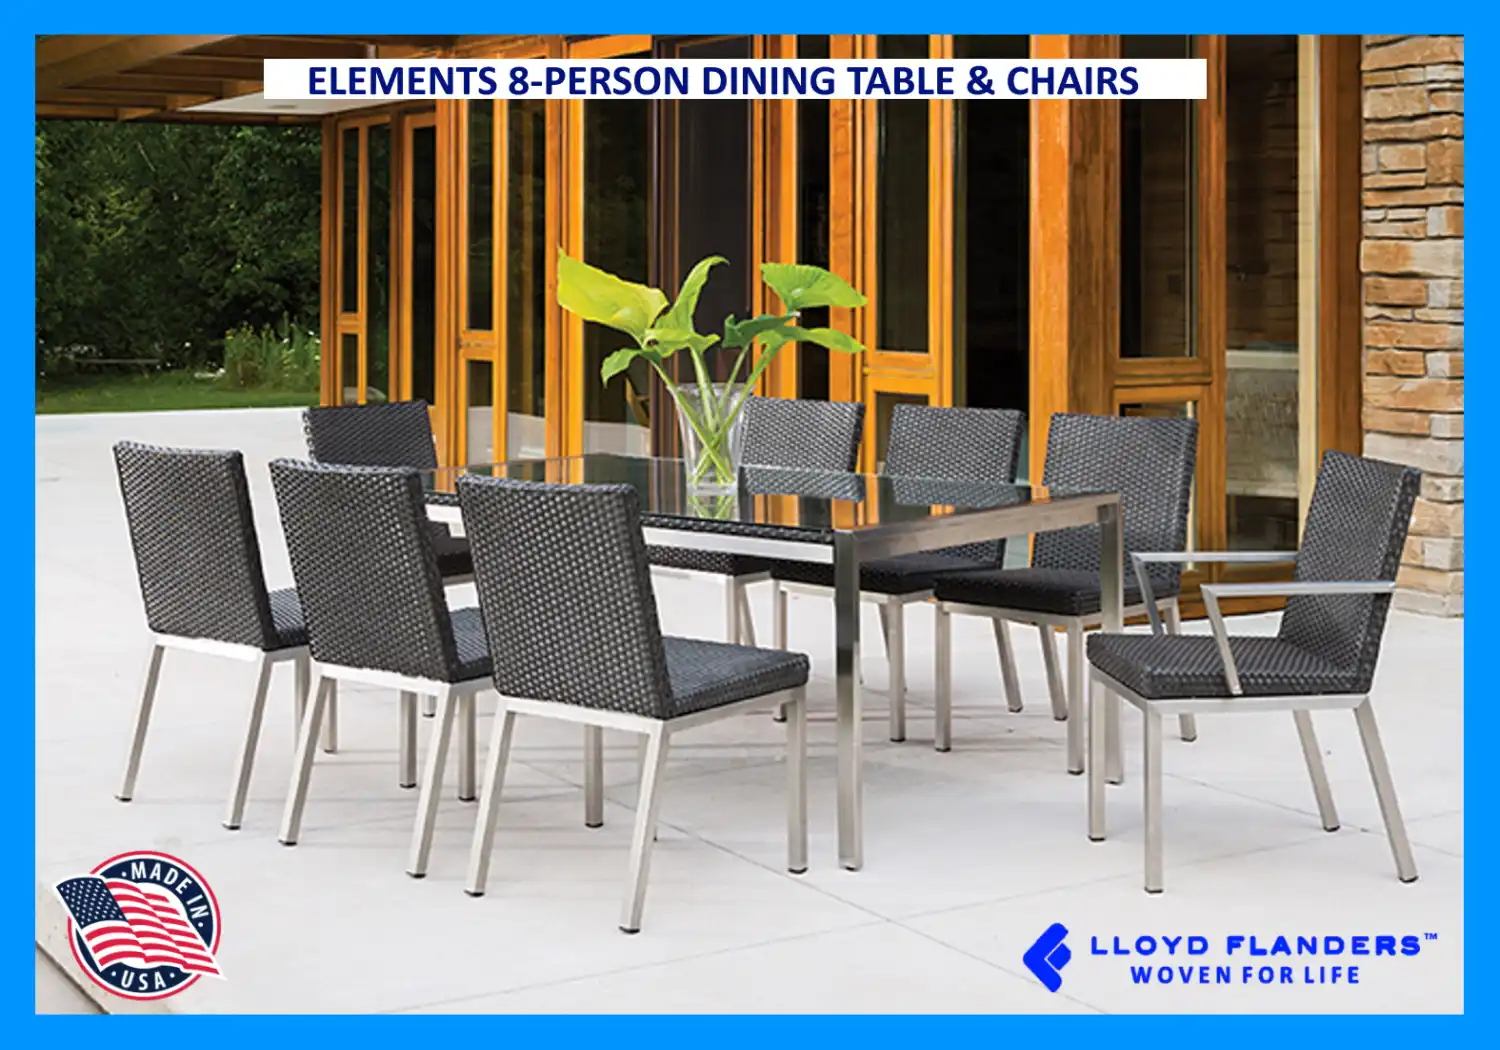 ELEMENTS 8-PERSON DINING TABLE & CHAIRS